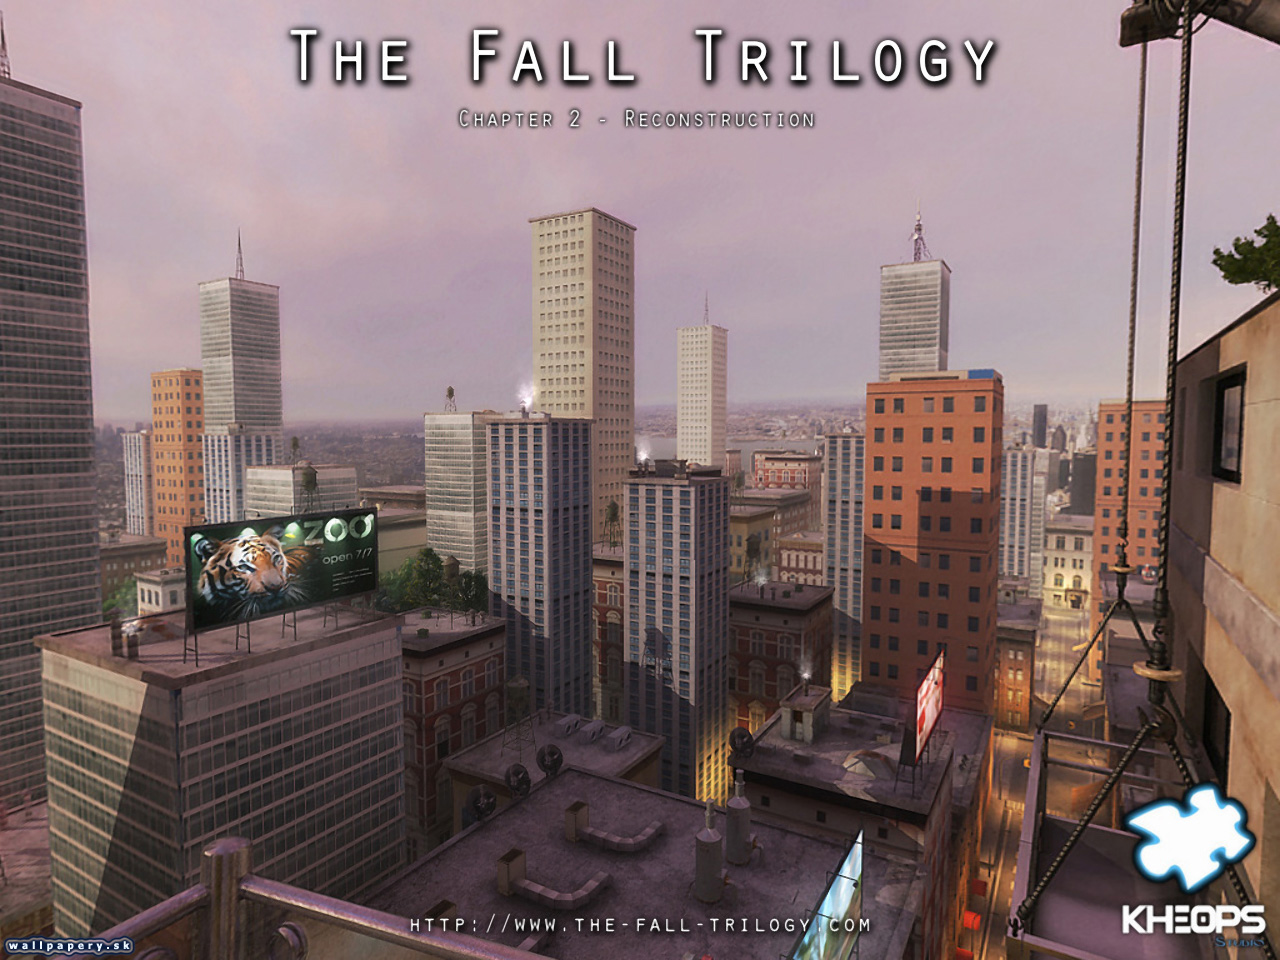 The Fall Trilogy - Chapter 2: Reconstruction - wallpaper 4